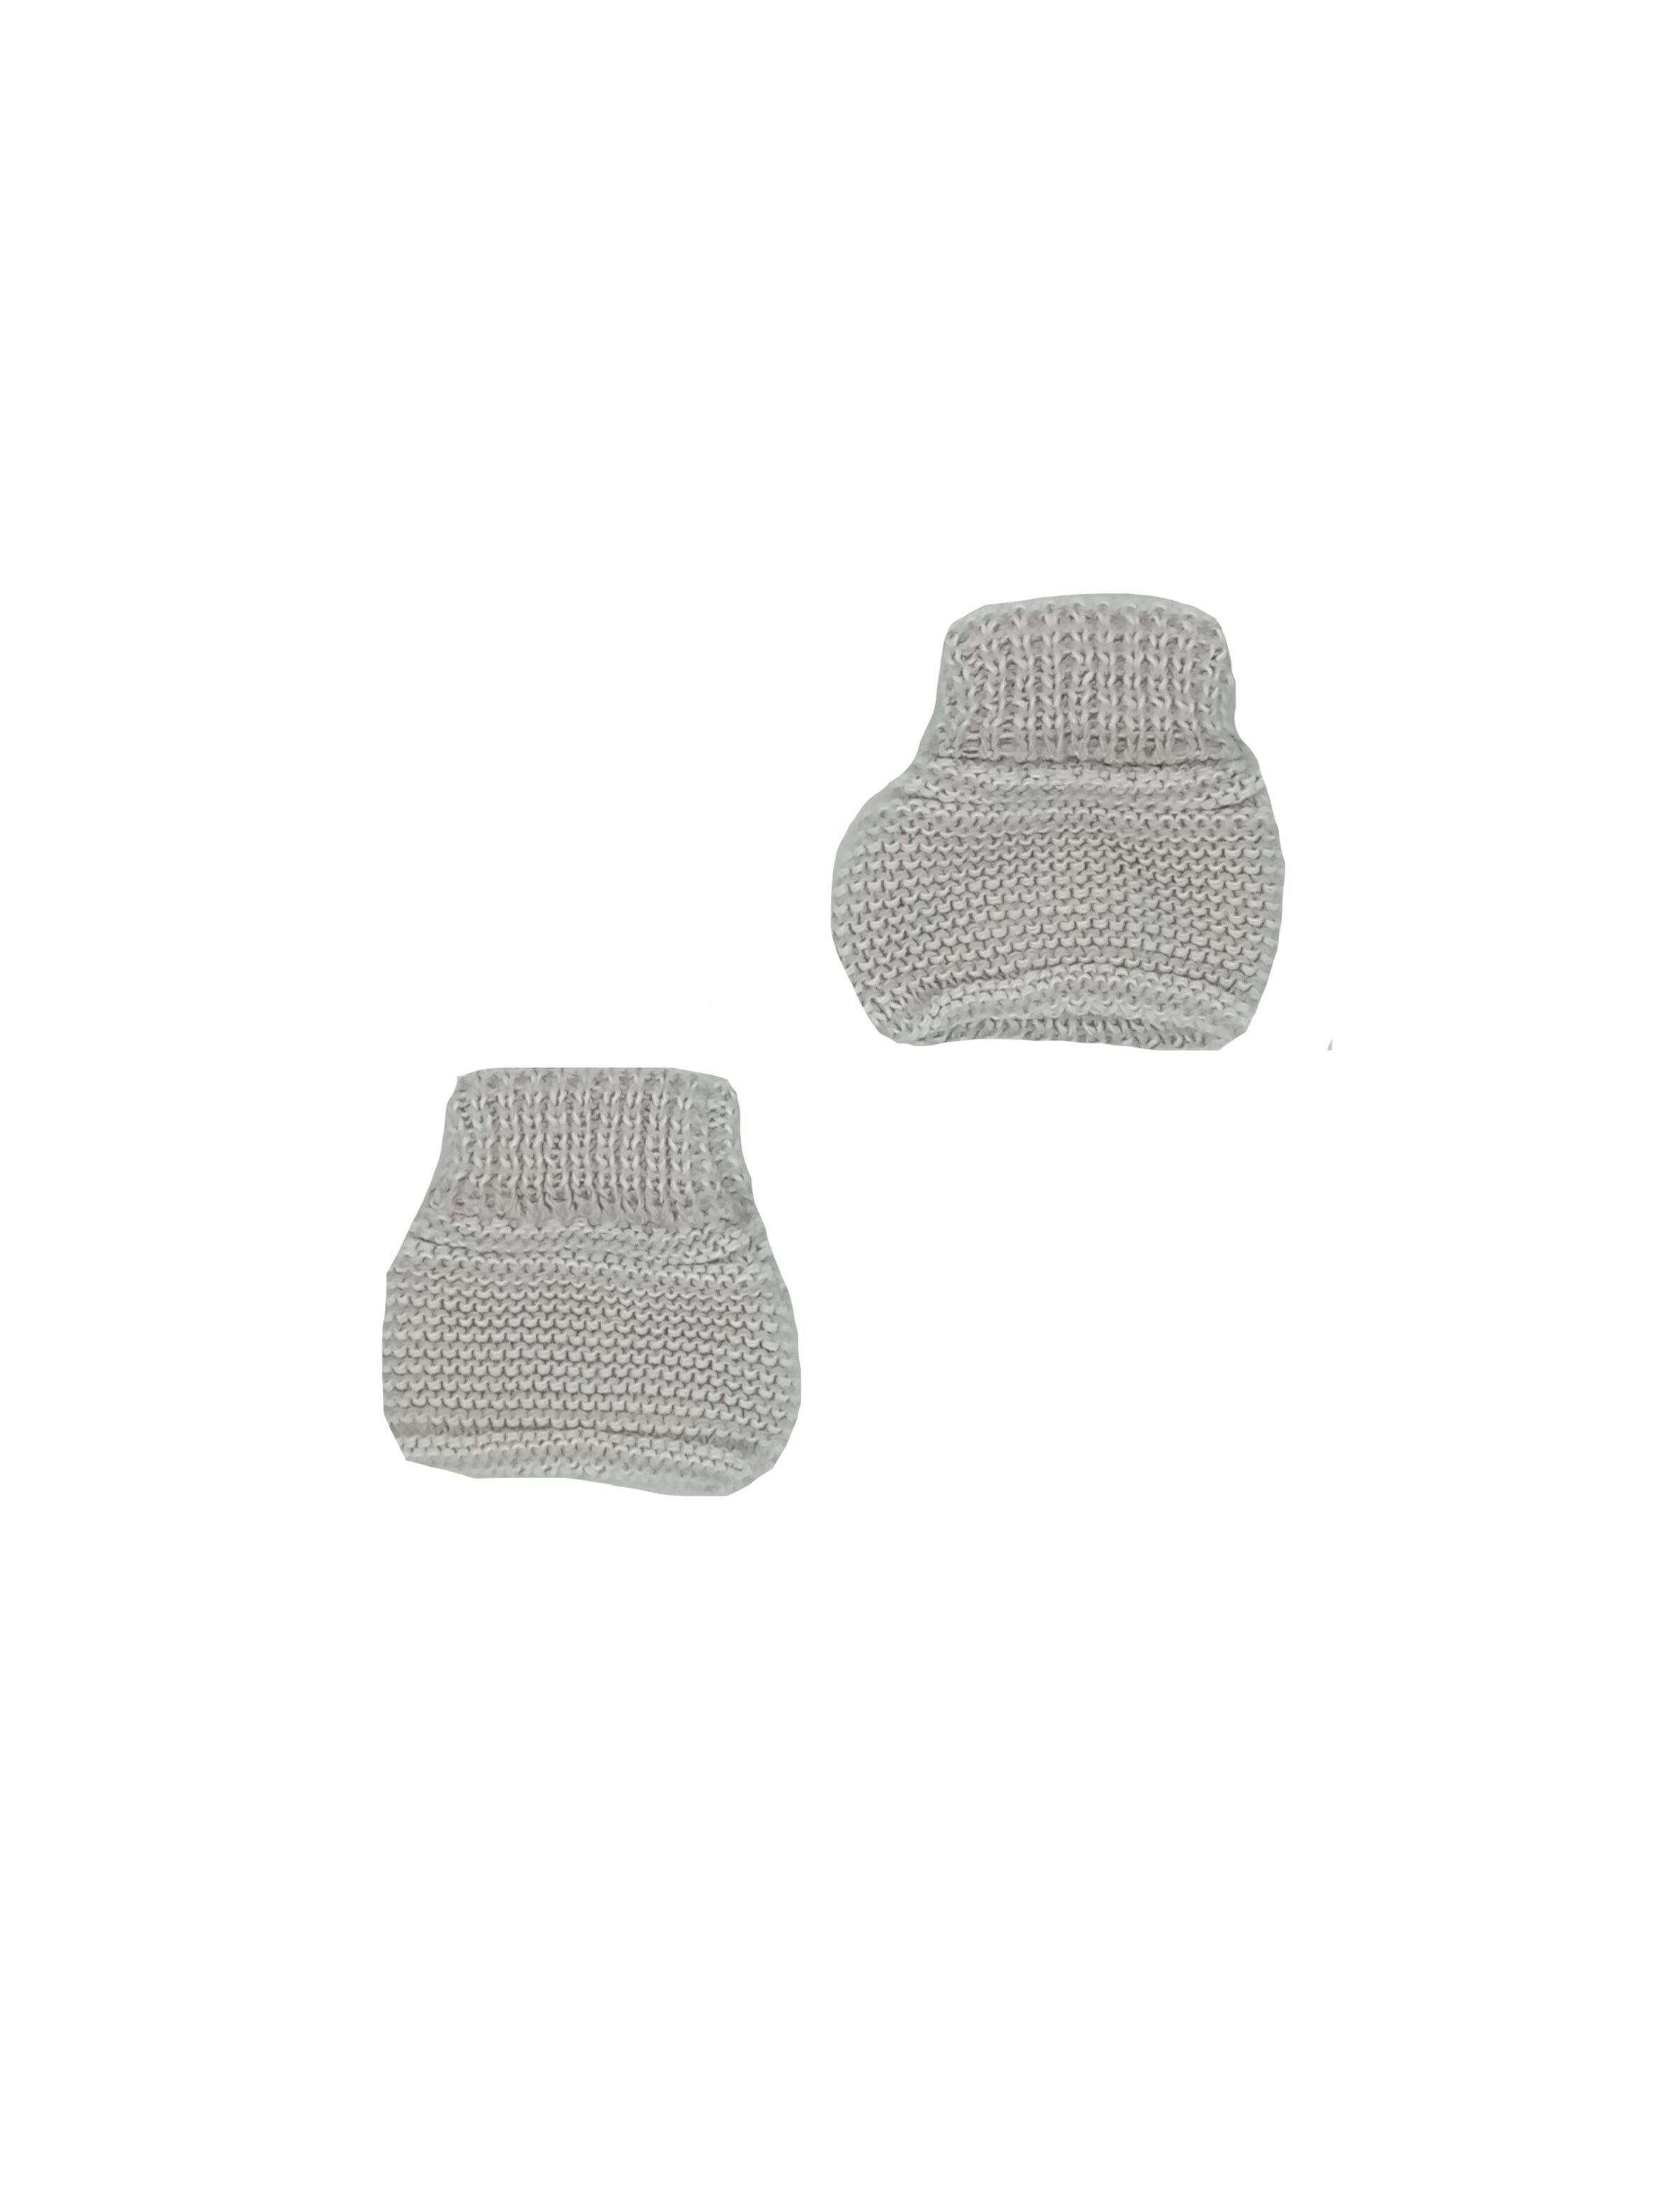 Tiny Baby Grey Knitted Booties - Booties - La Manufacture de Layette